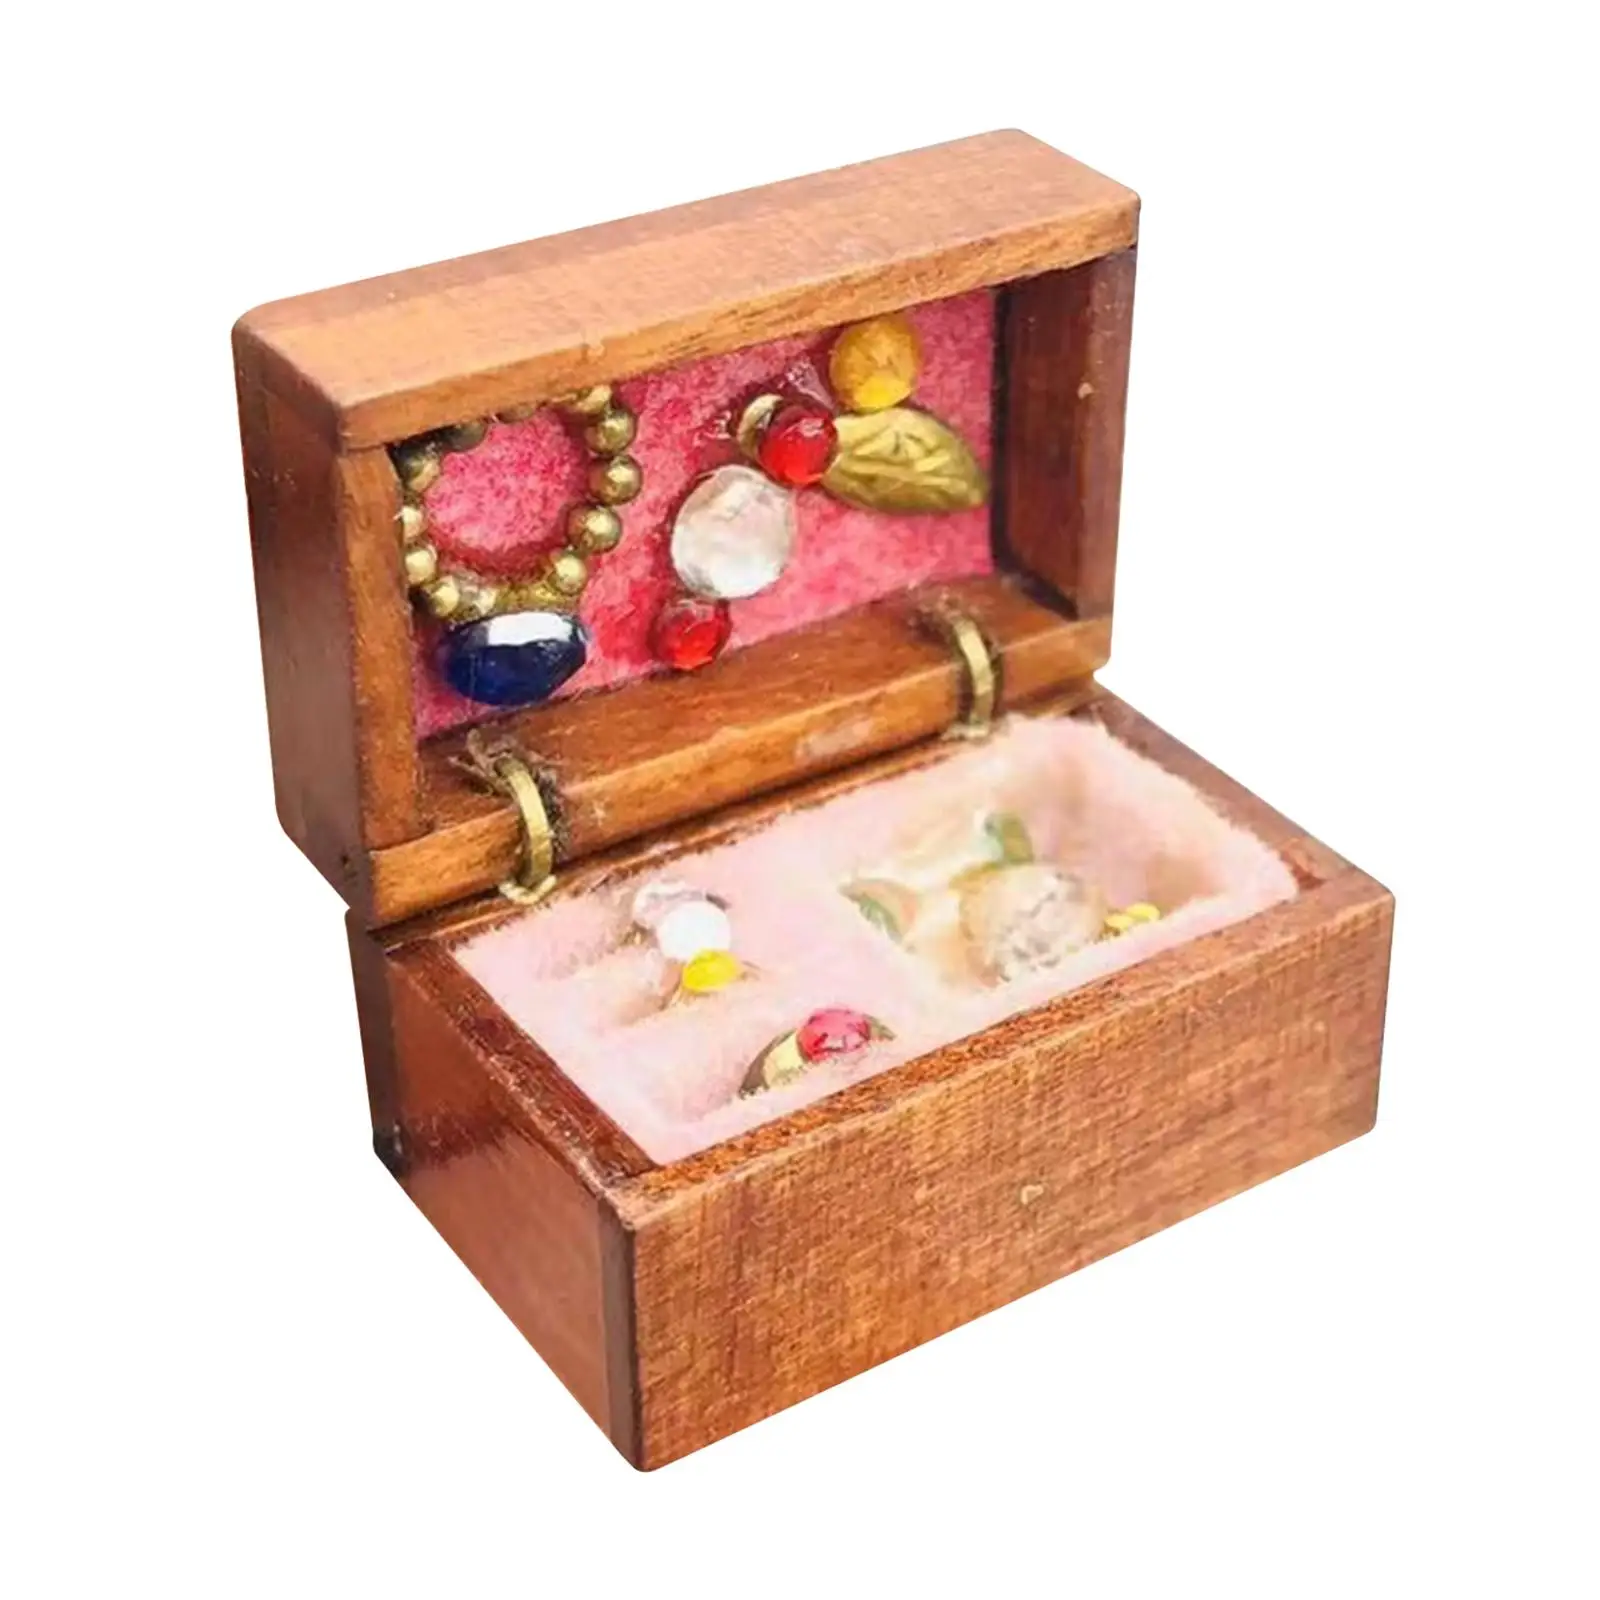 1:12 Doll House Retro Wooden Treasure Chest Mini Model Smooth Surface and Polished Exquisite Workmanship Jewelry Case Organizer